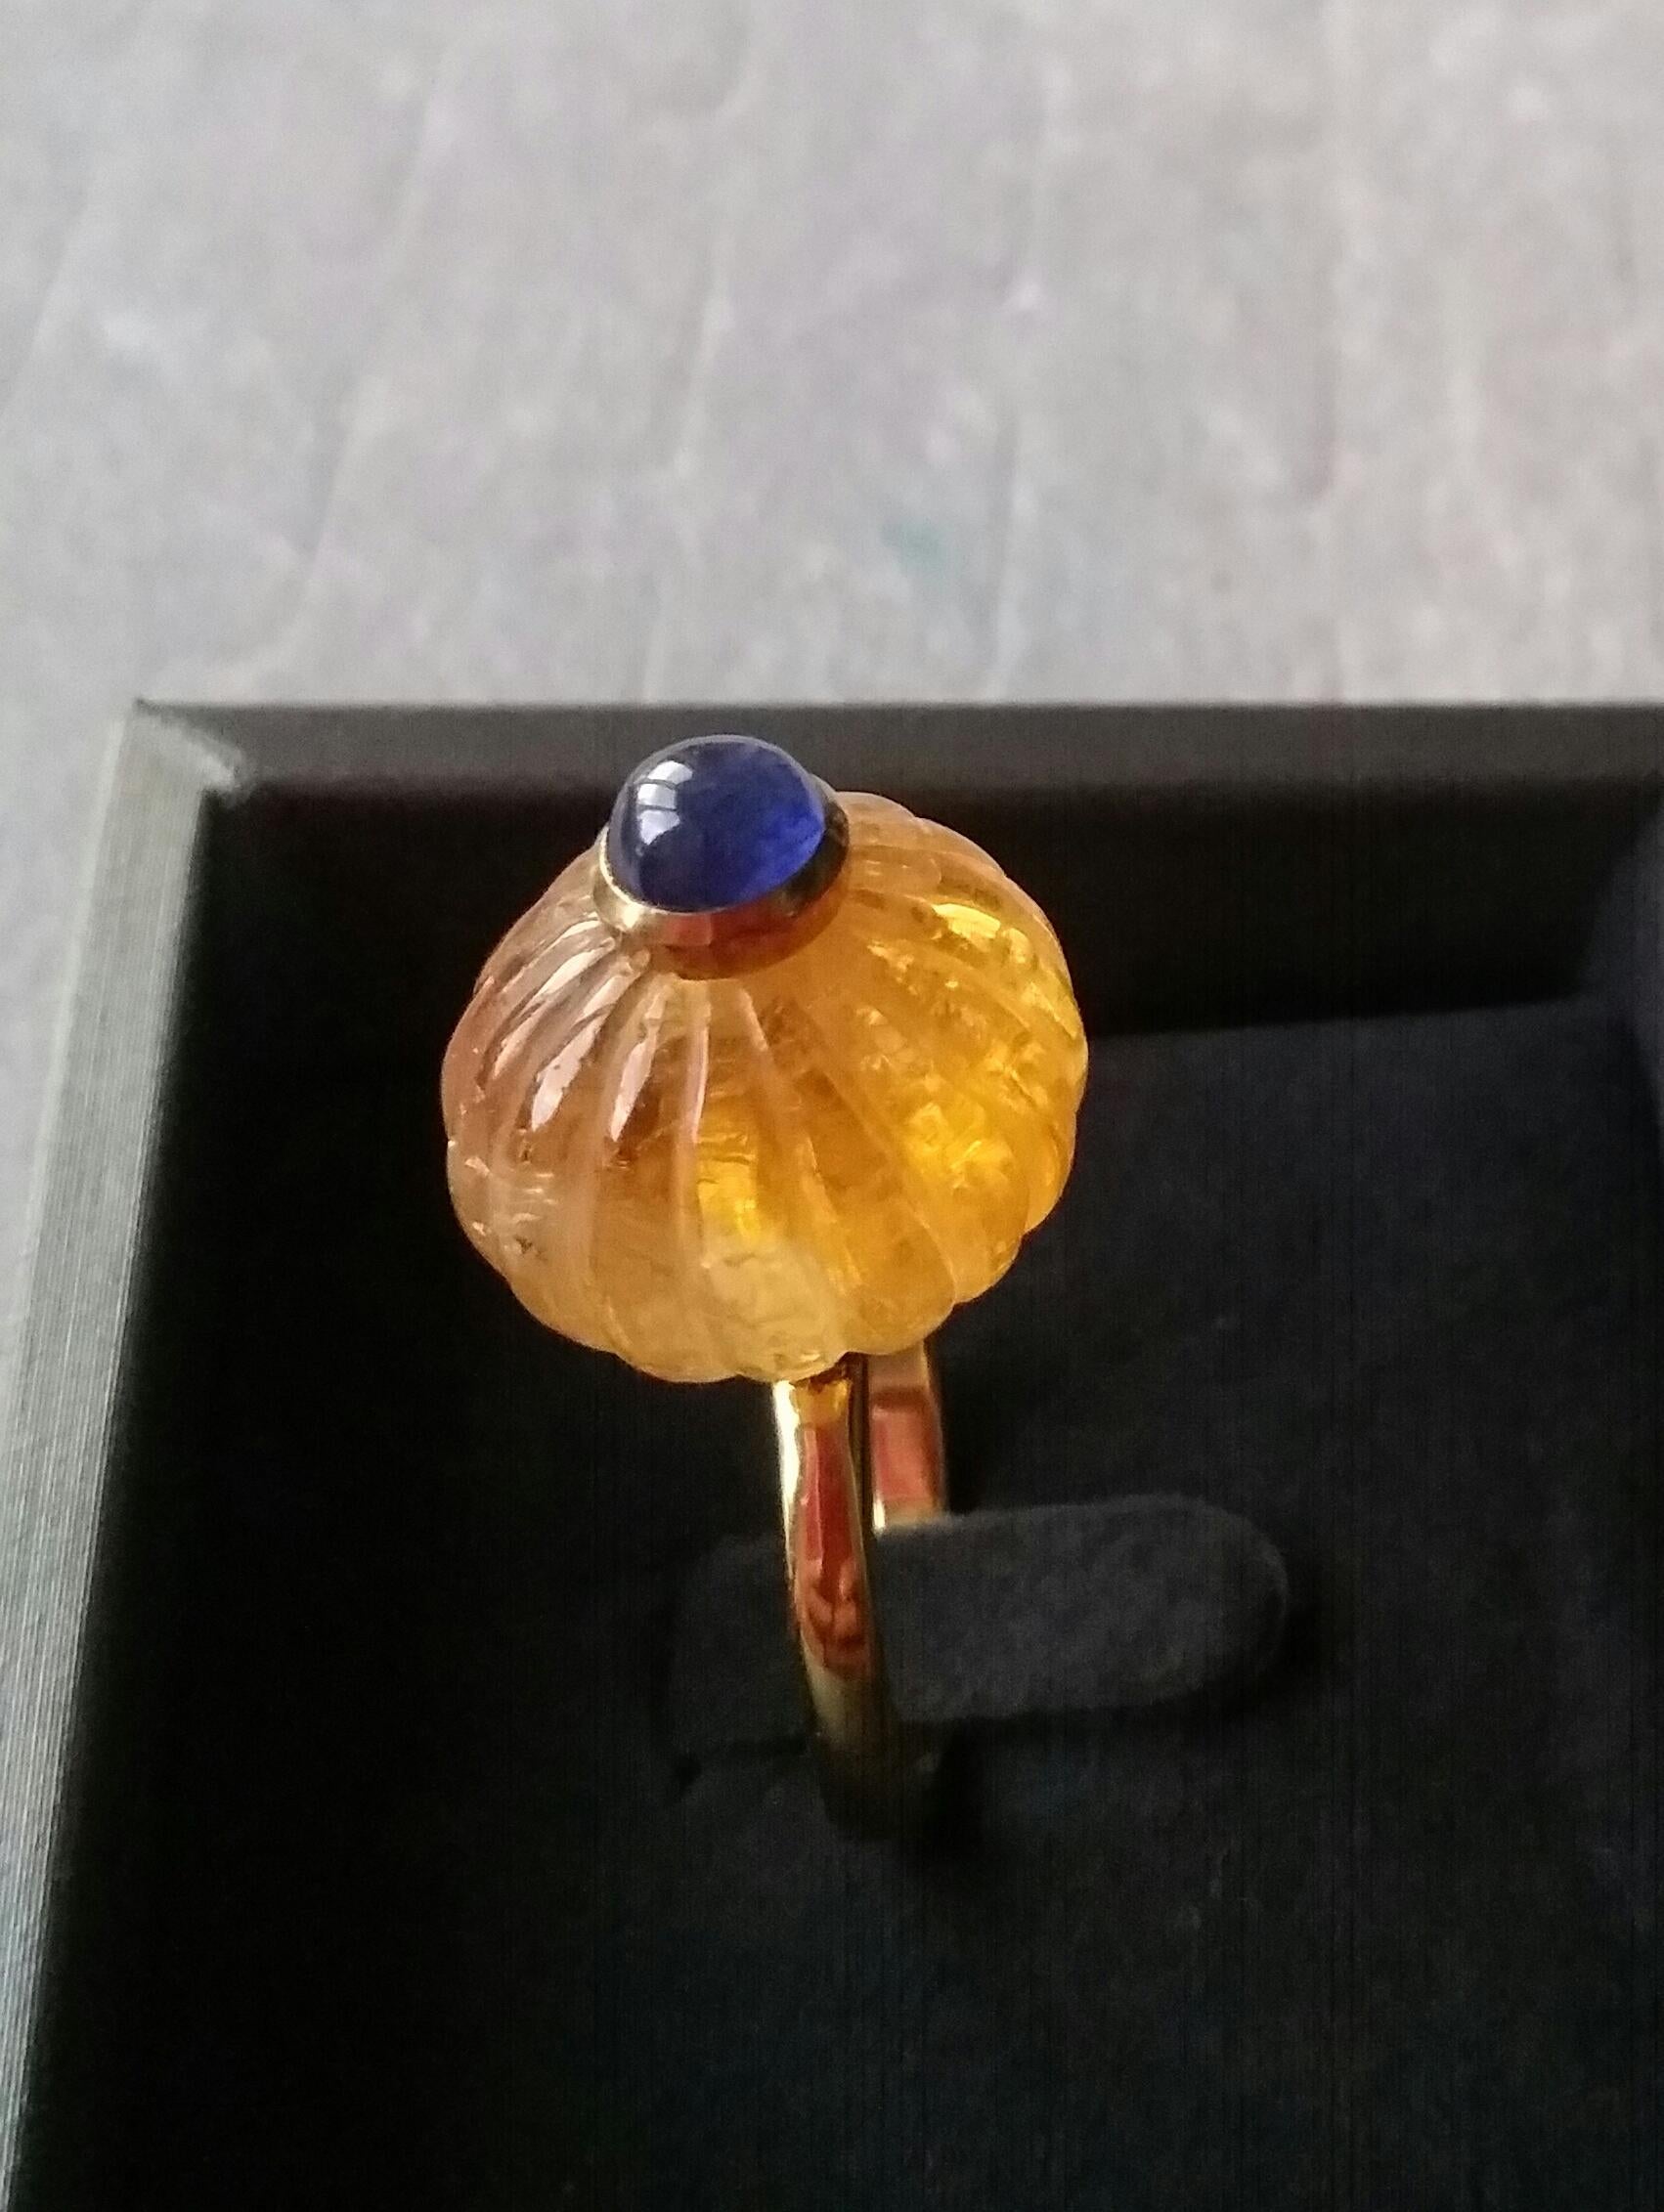 Melon cut Citrine Quartz Round Bead  of 16mm. in diameter and 14 mm. thick with in the center a round blue Sapphire cabochon of 8 mm. in diameter in the  is mounted on top of a 14 Kt. yellow gold shank.
In 1978 our workshop started in Italy to make